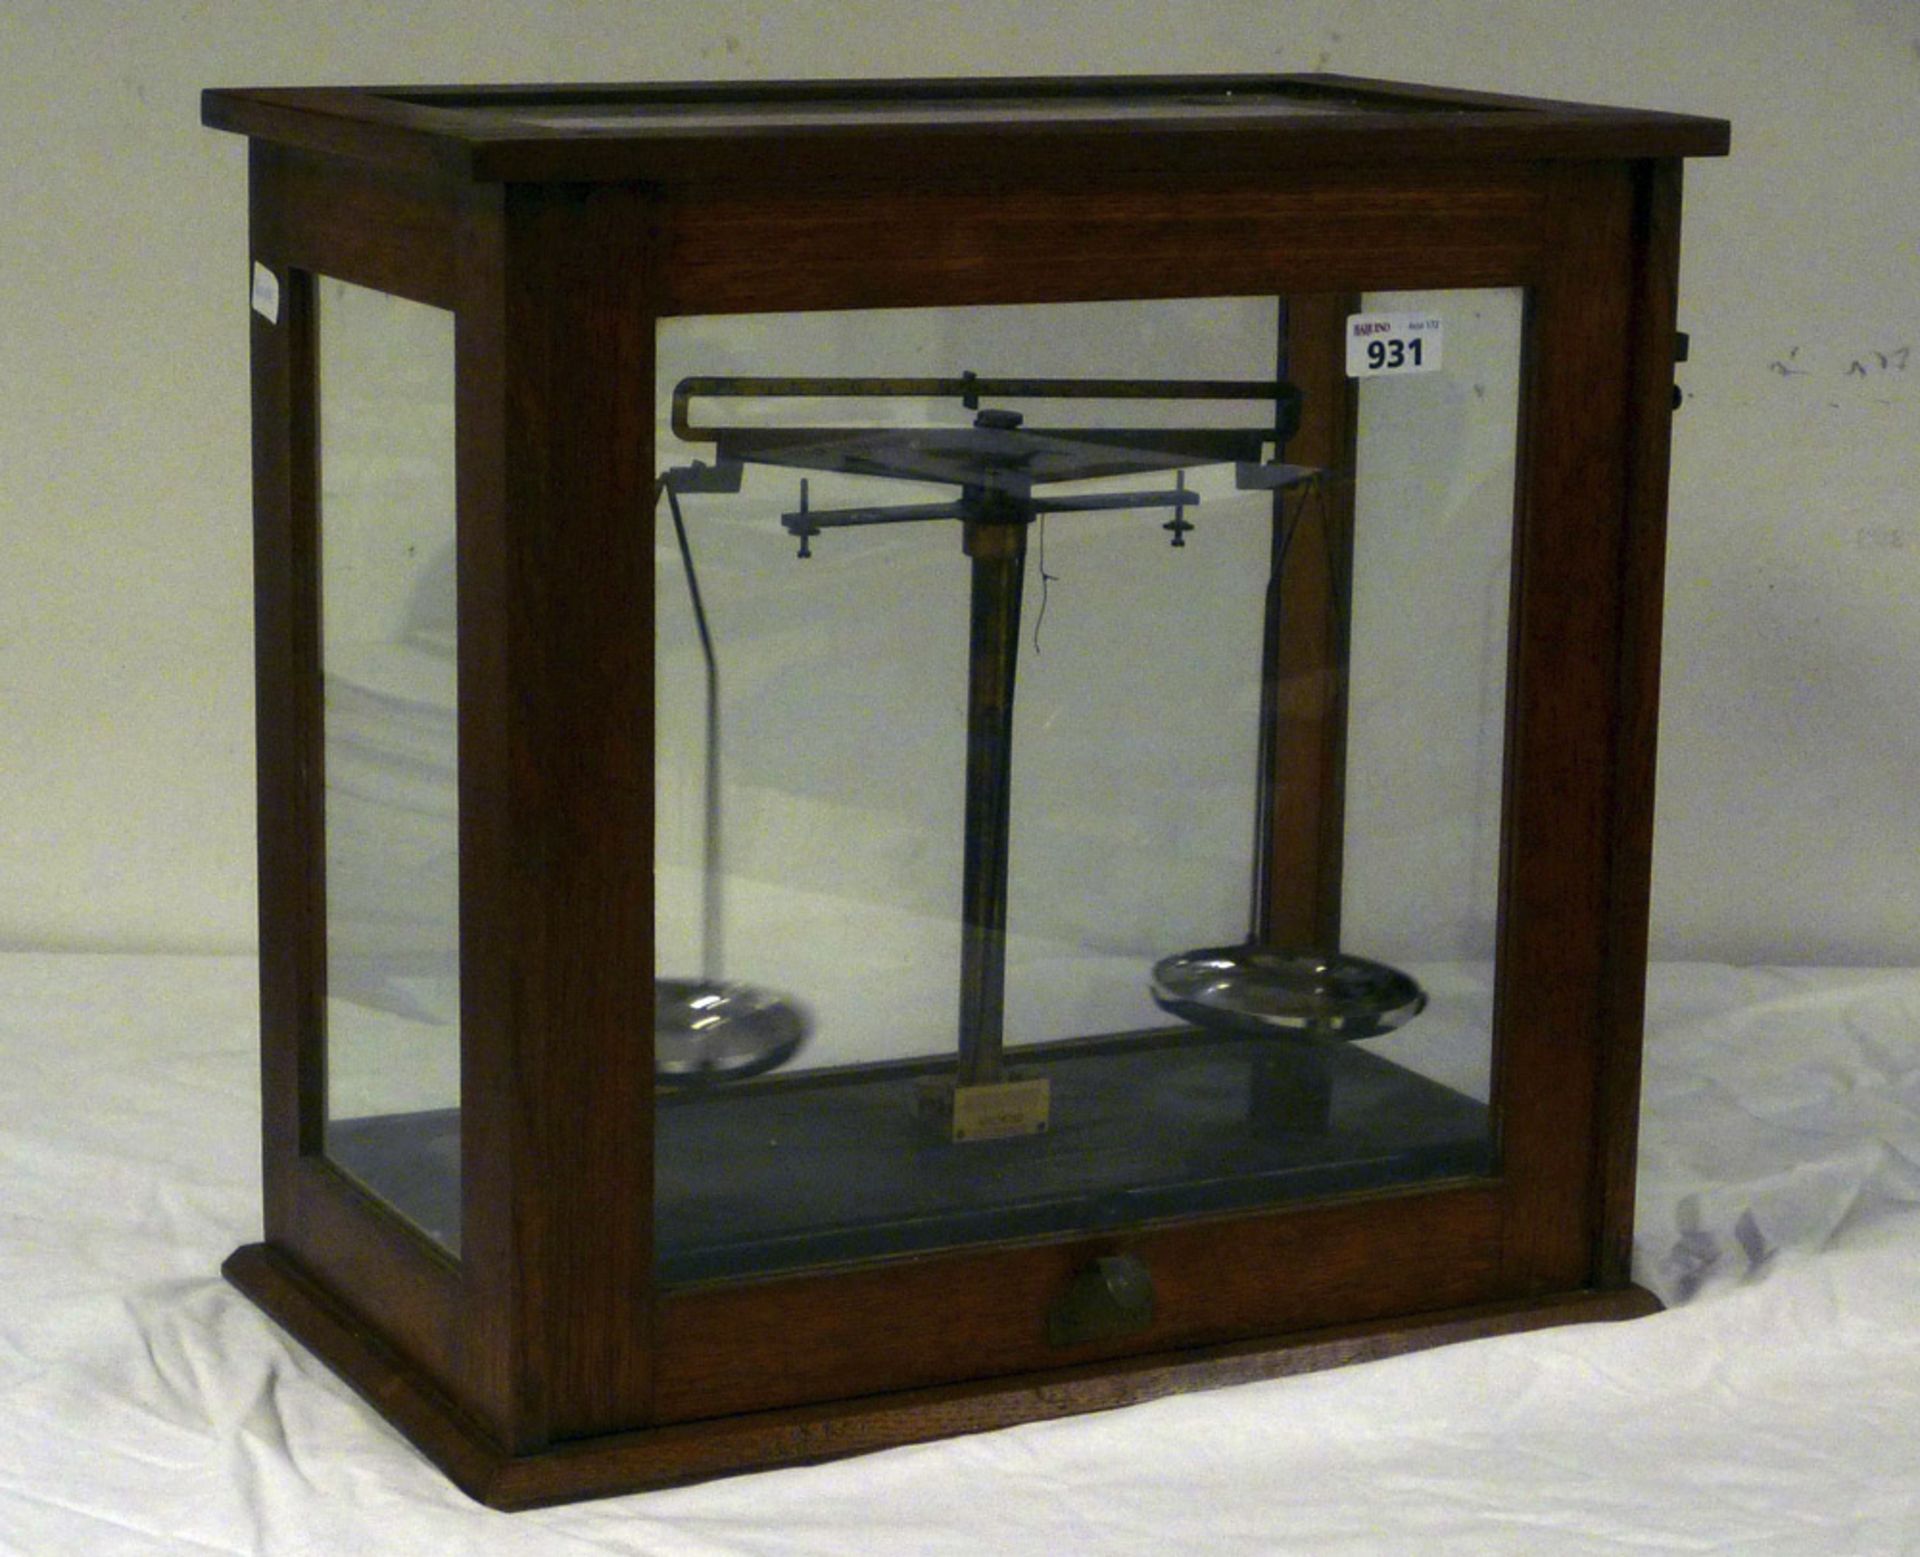 STEELYARD IN PLASTICS AND BRASS 20TH CENTURY with box in oak wood and glass. Measures cm. 43 x 46